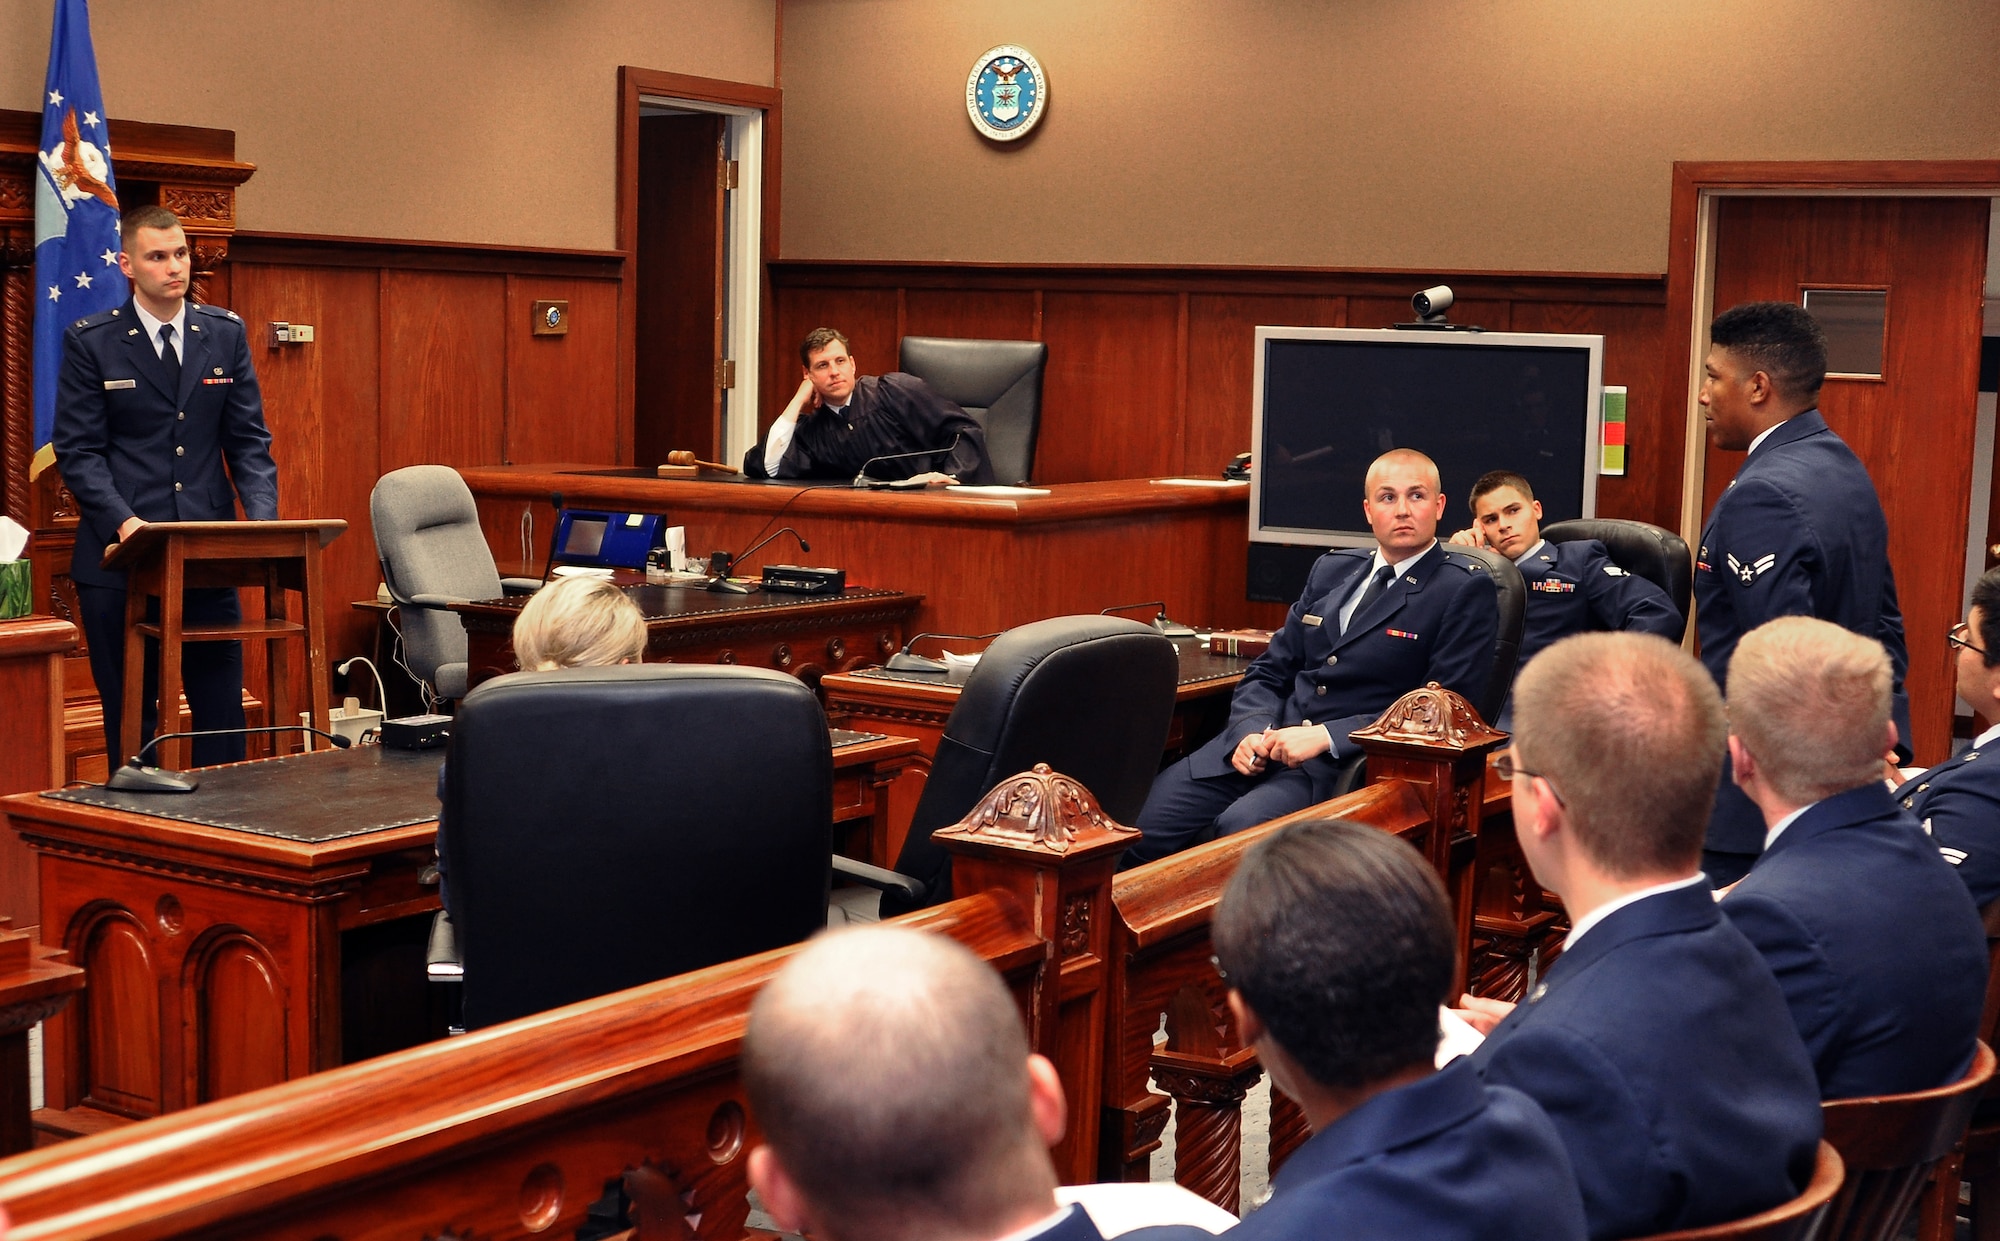 Airman 1st Class Mychal Allen (right), 55th Maintenance Squadron, asks U. S. Air Force Capt. Dave Rolek, 55th Wing assistant staff judge advocate, questions during the first ever ‘mock trial’ held June 9 inside the Offutt AFB court room. All Airmen attending the week-long First Term Airmen’s Center orientation course will participate in a mock trial as part of their training. The 55th Wing legal office created the program with the goal of preventing sexual assault through education and awareness.  (U. S. Air Force photo/Delanie Stafford)